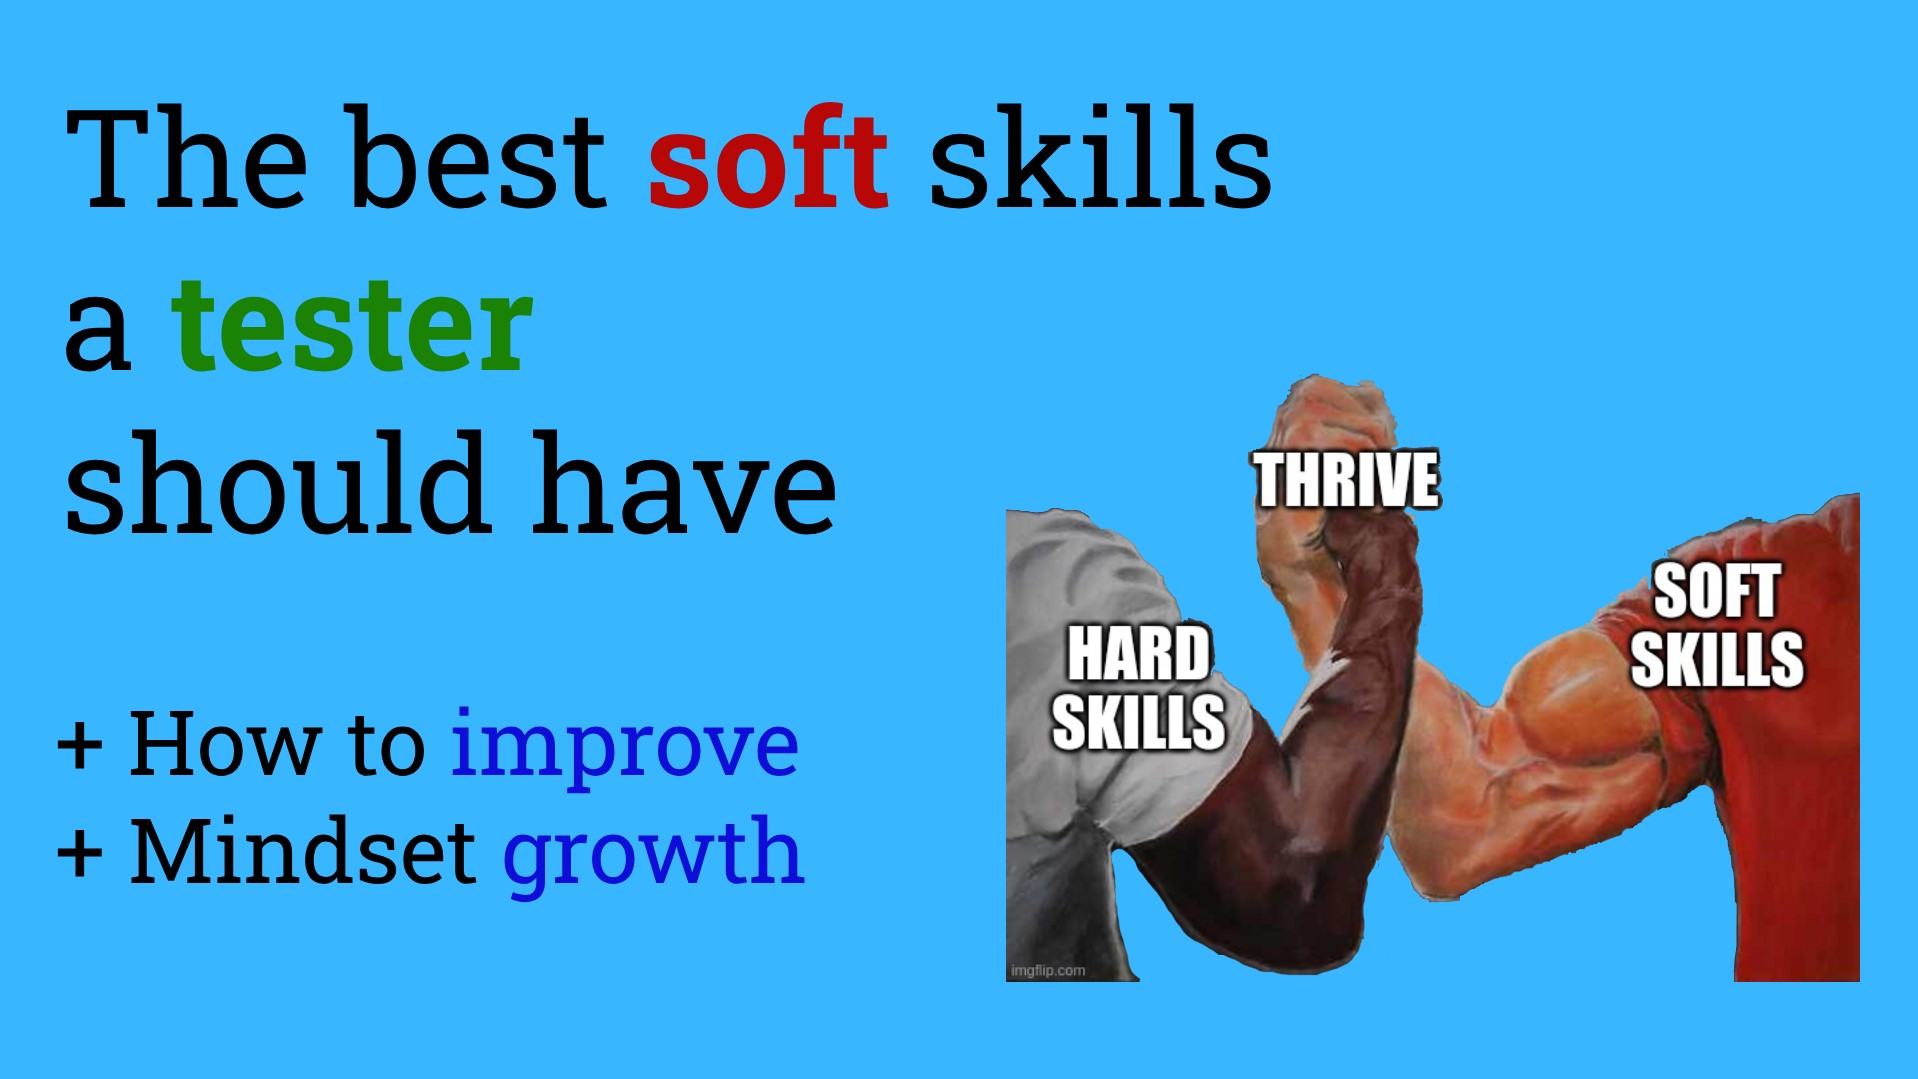 The best soft skills and mindset a tester should have